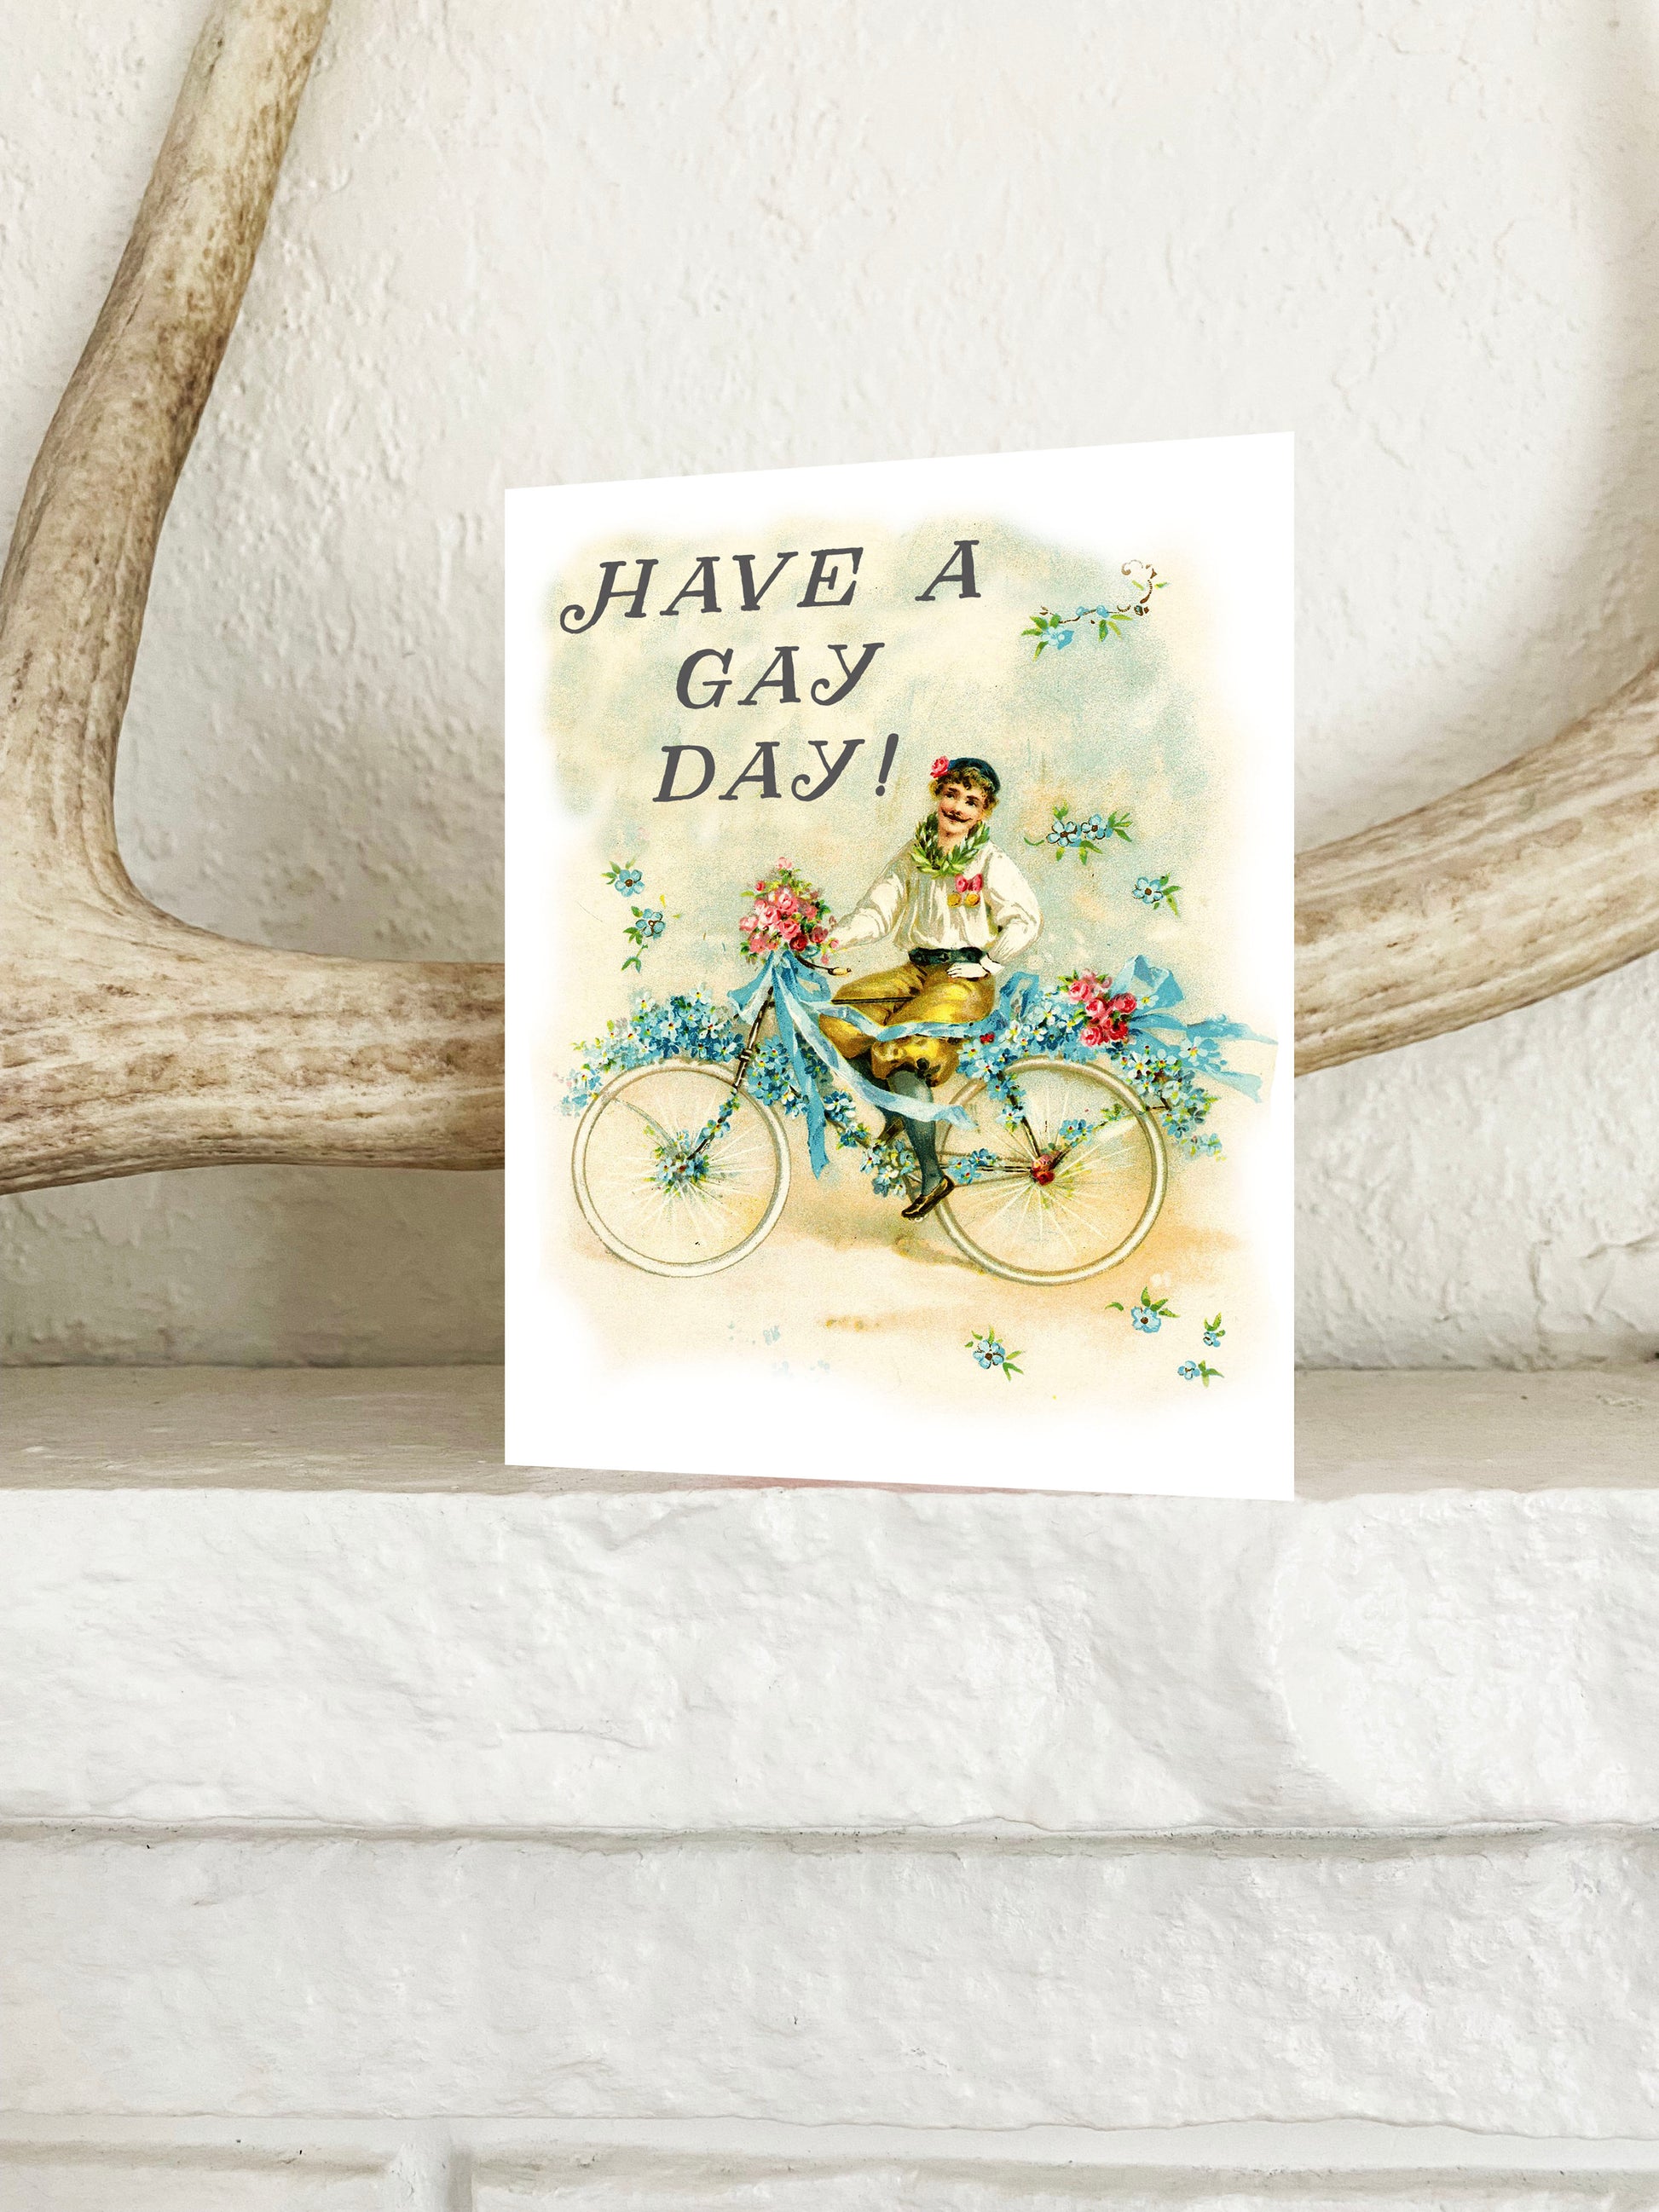 pretty cute fun greeting notecard note card retro vintage style man on bicycle pastel colors says have a gay day on the front blank inside send to best friend crush girlfriend boyfriend partner lgbtq neighbor sister brother coworker coin laundry 